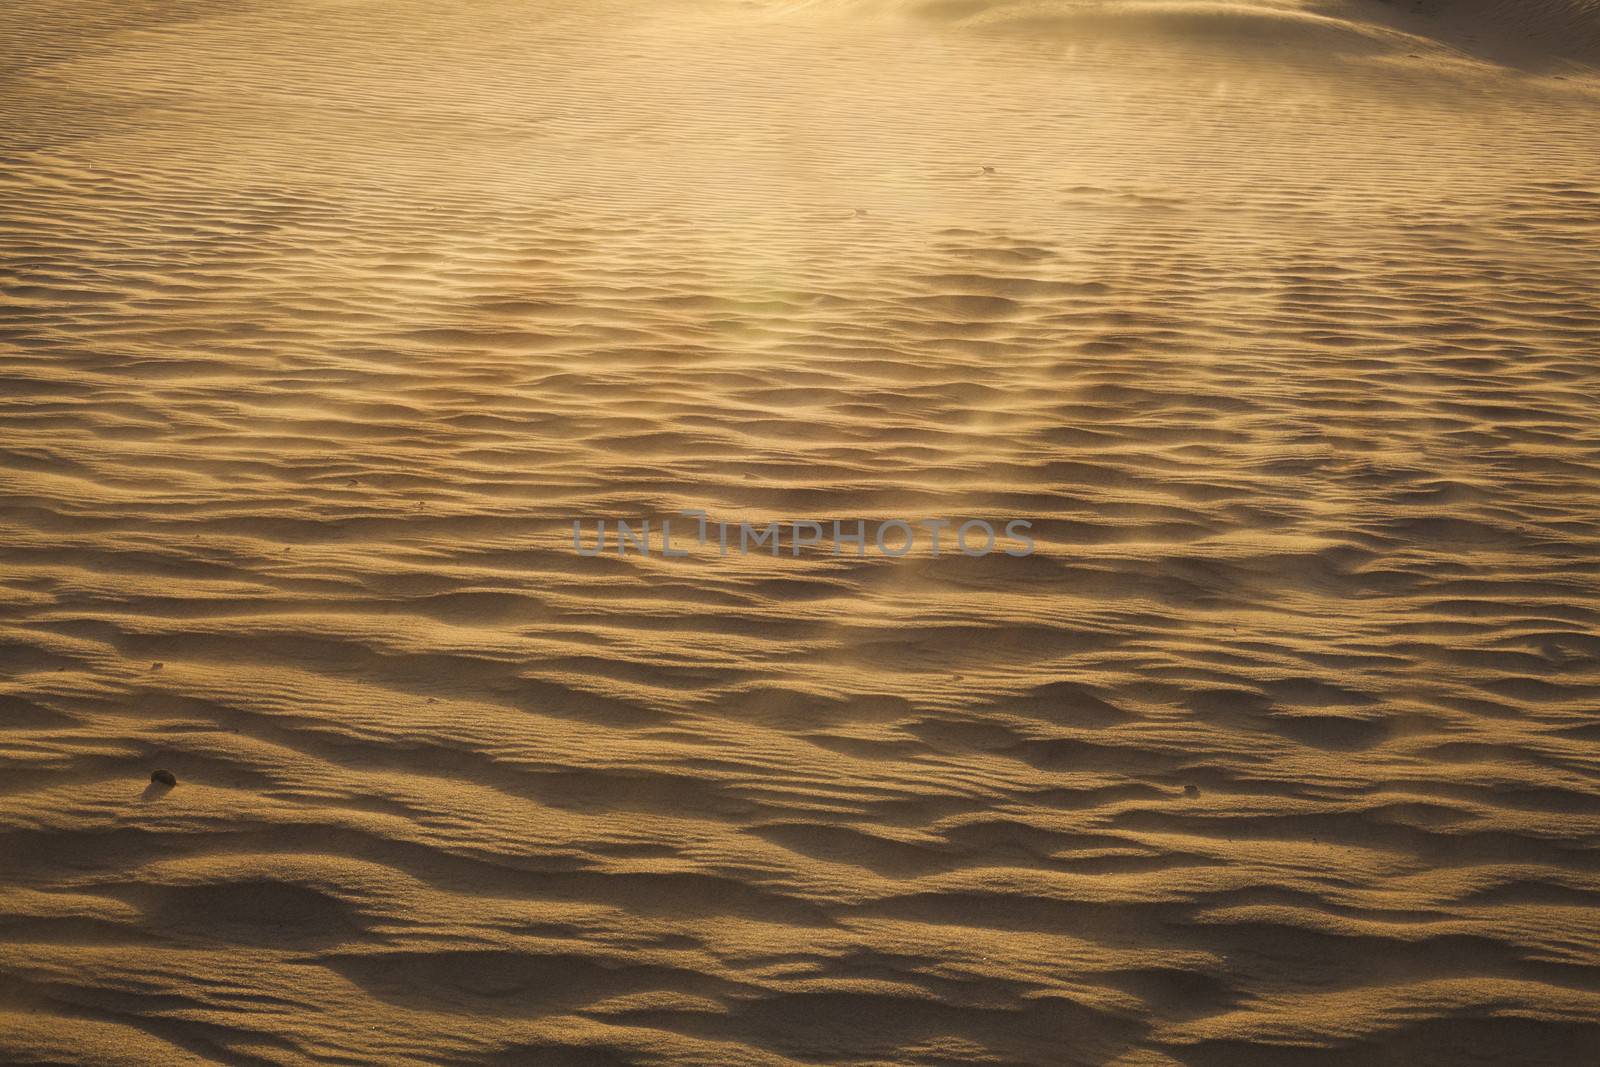 Landscape shot of the desert and the wind pattern on the sand, full frame